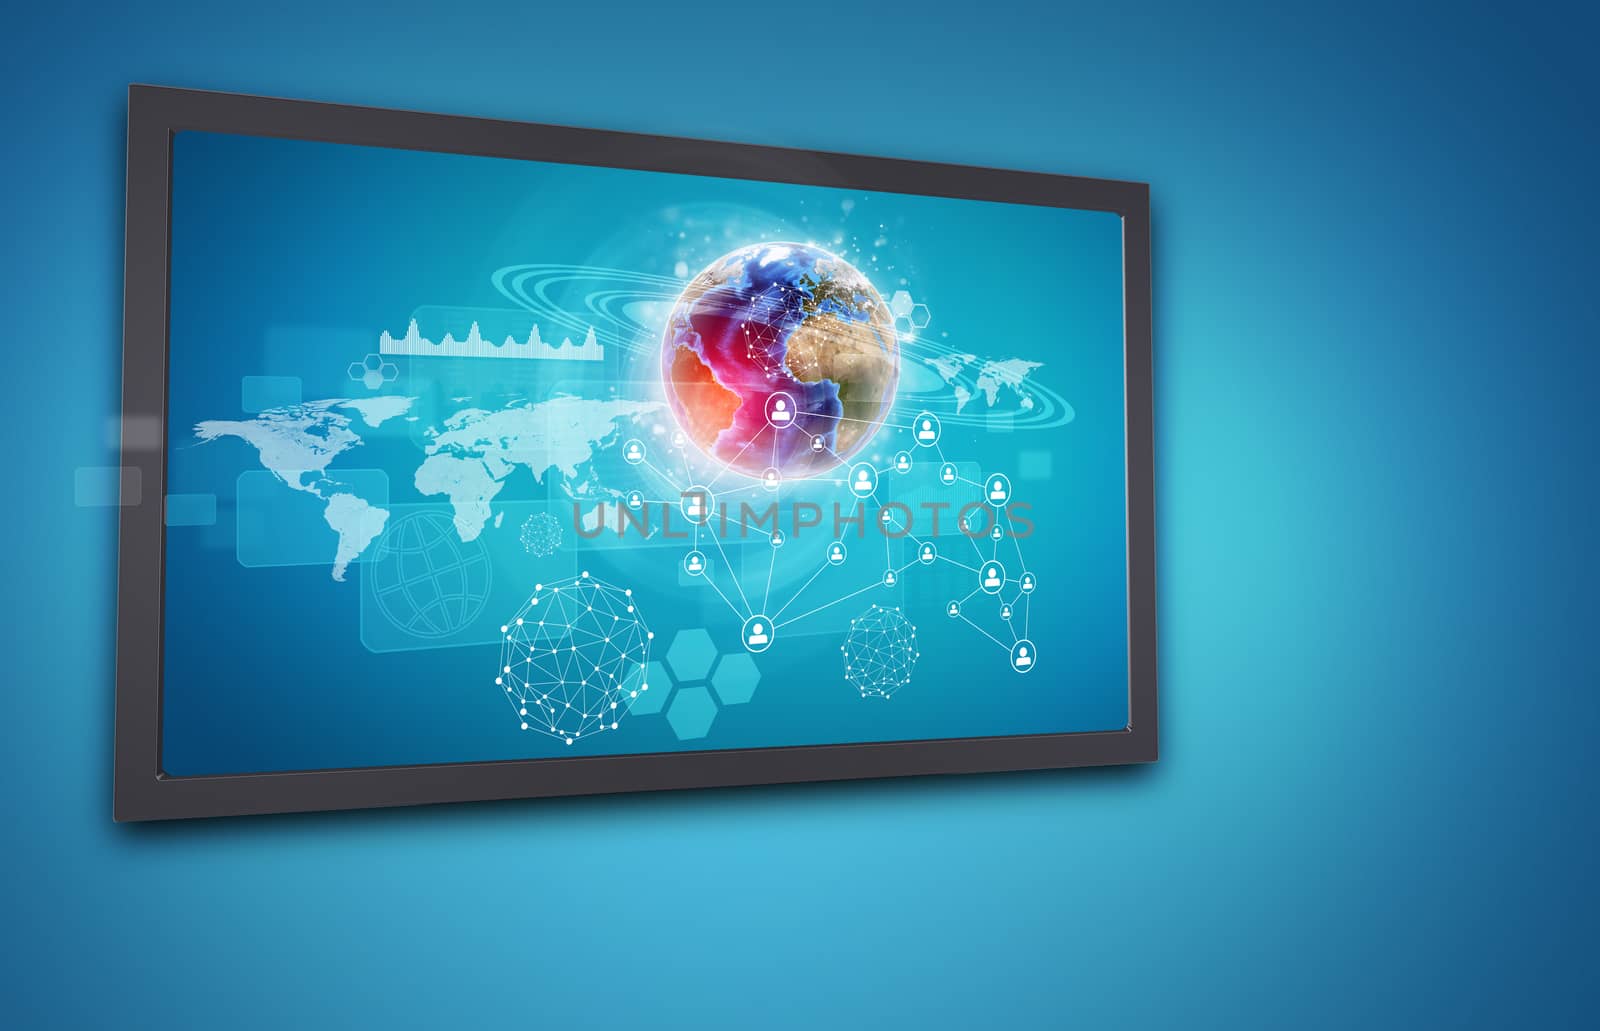 Touchscreen display with Globe, network of person icons and other elements, on blue background. Element of this image furnished by NASA